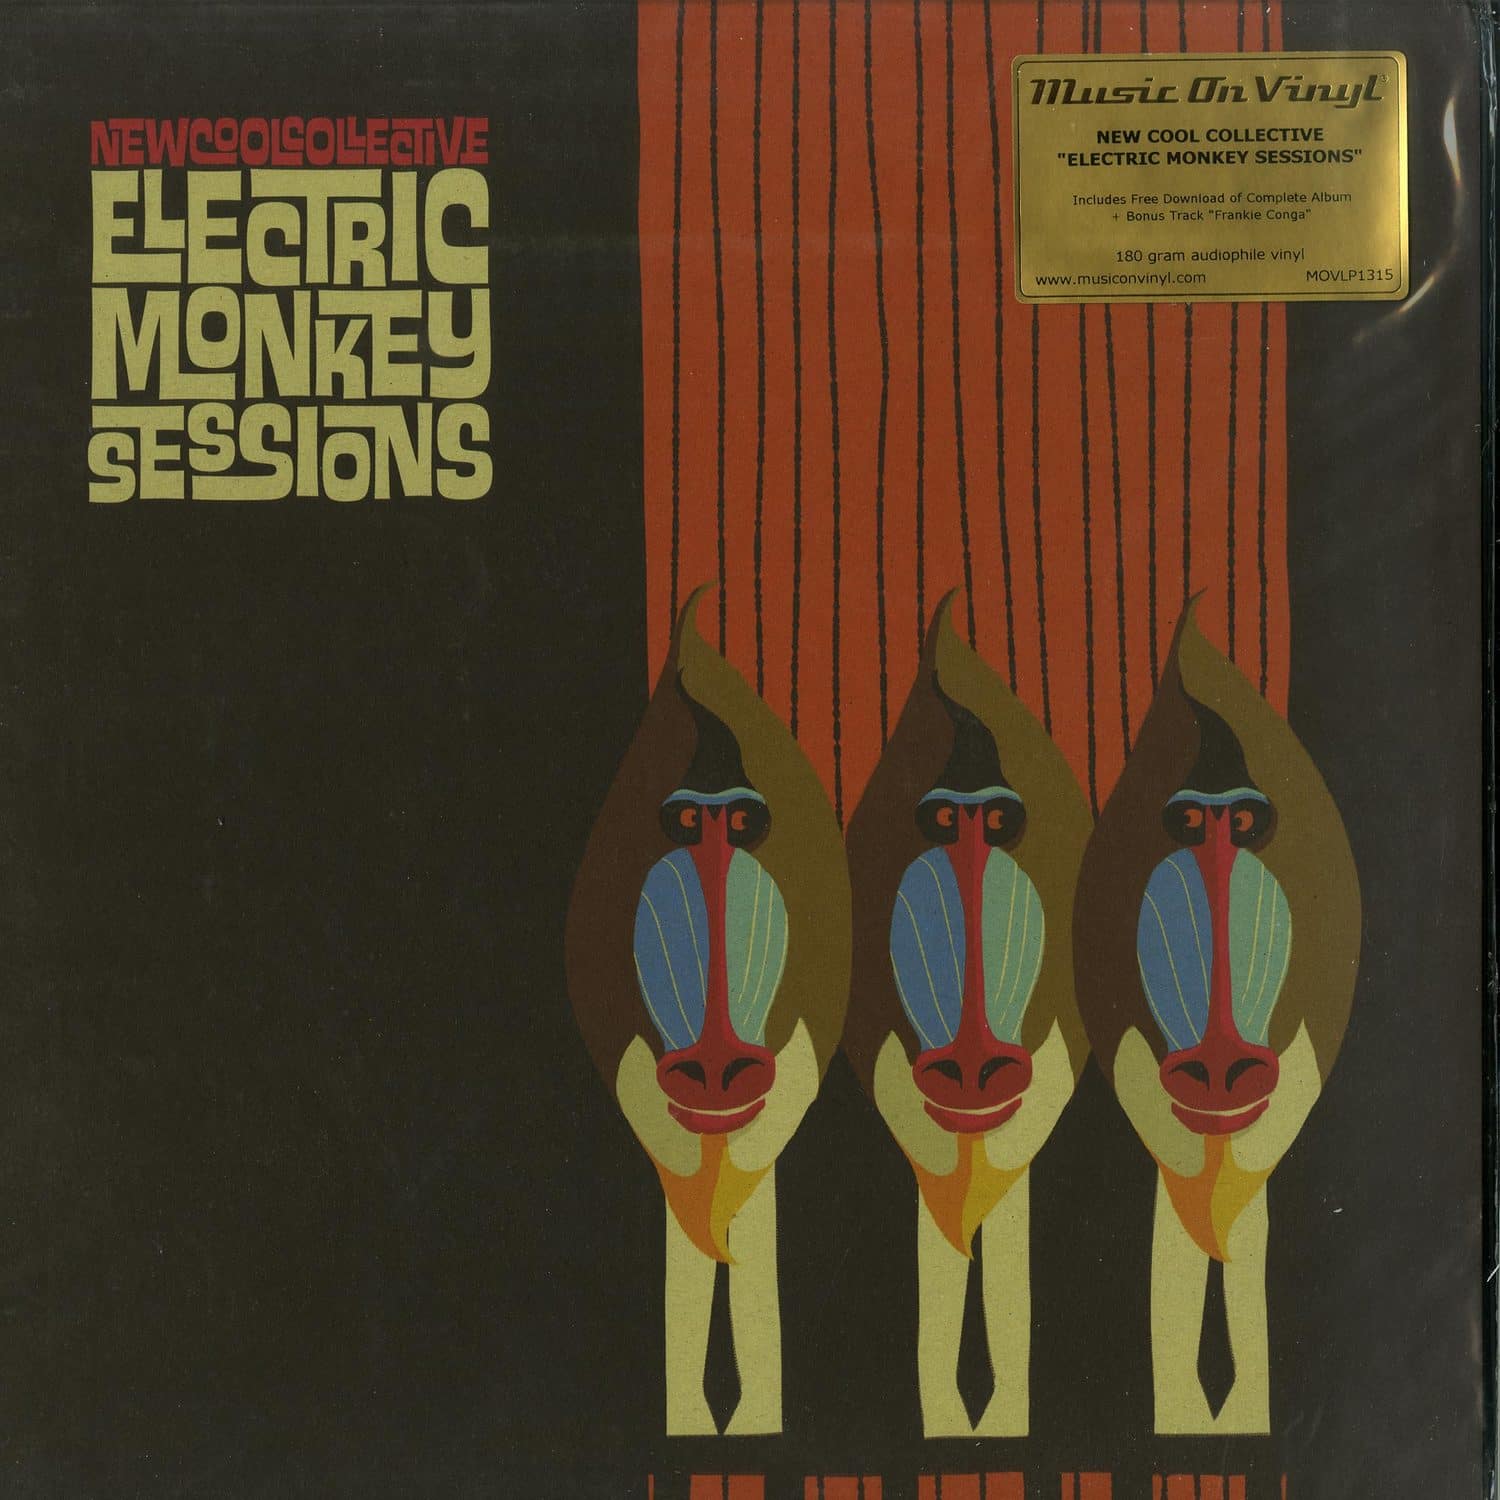 New Cool Collective - ELECTRIC MONKEY SESSIONS 